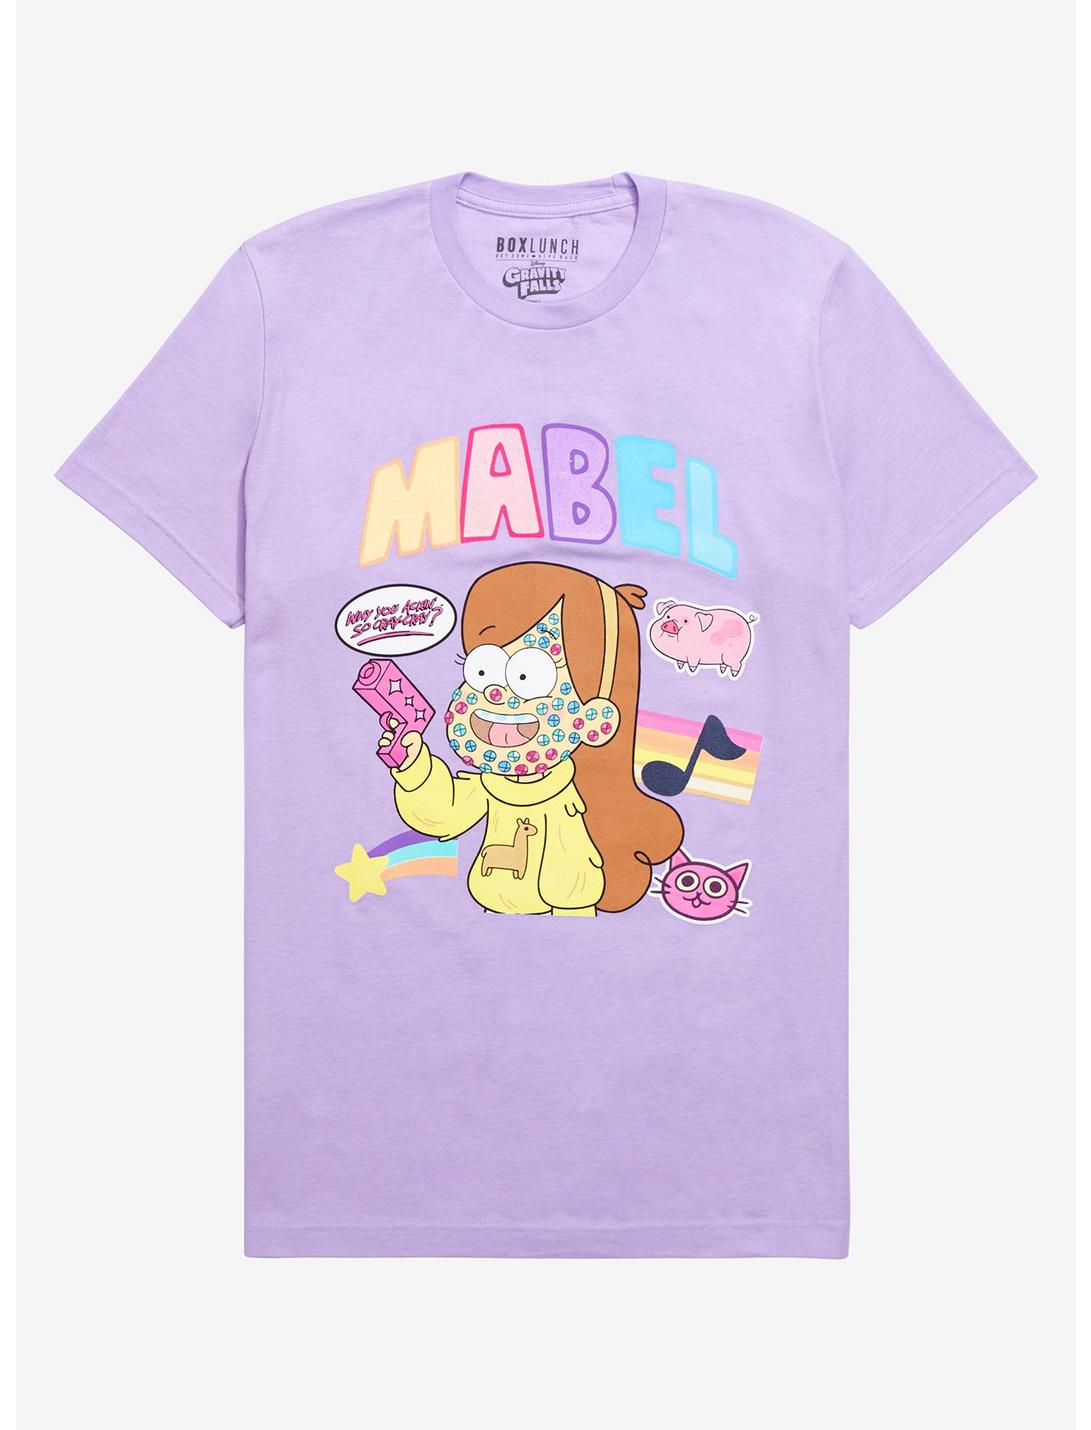 Disney Gravity Falls Mabel Pines Craft Styles T-Shirt - BoxLunch Exclusive, LILAC, hi-res